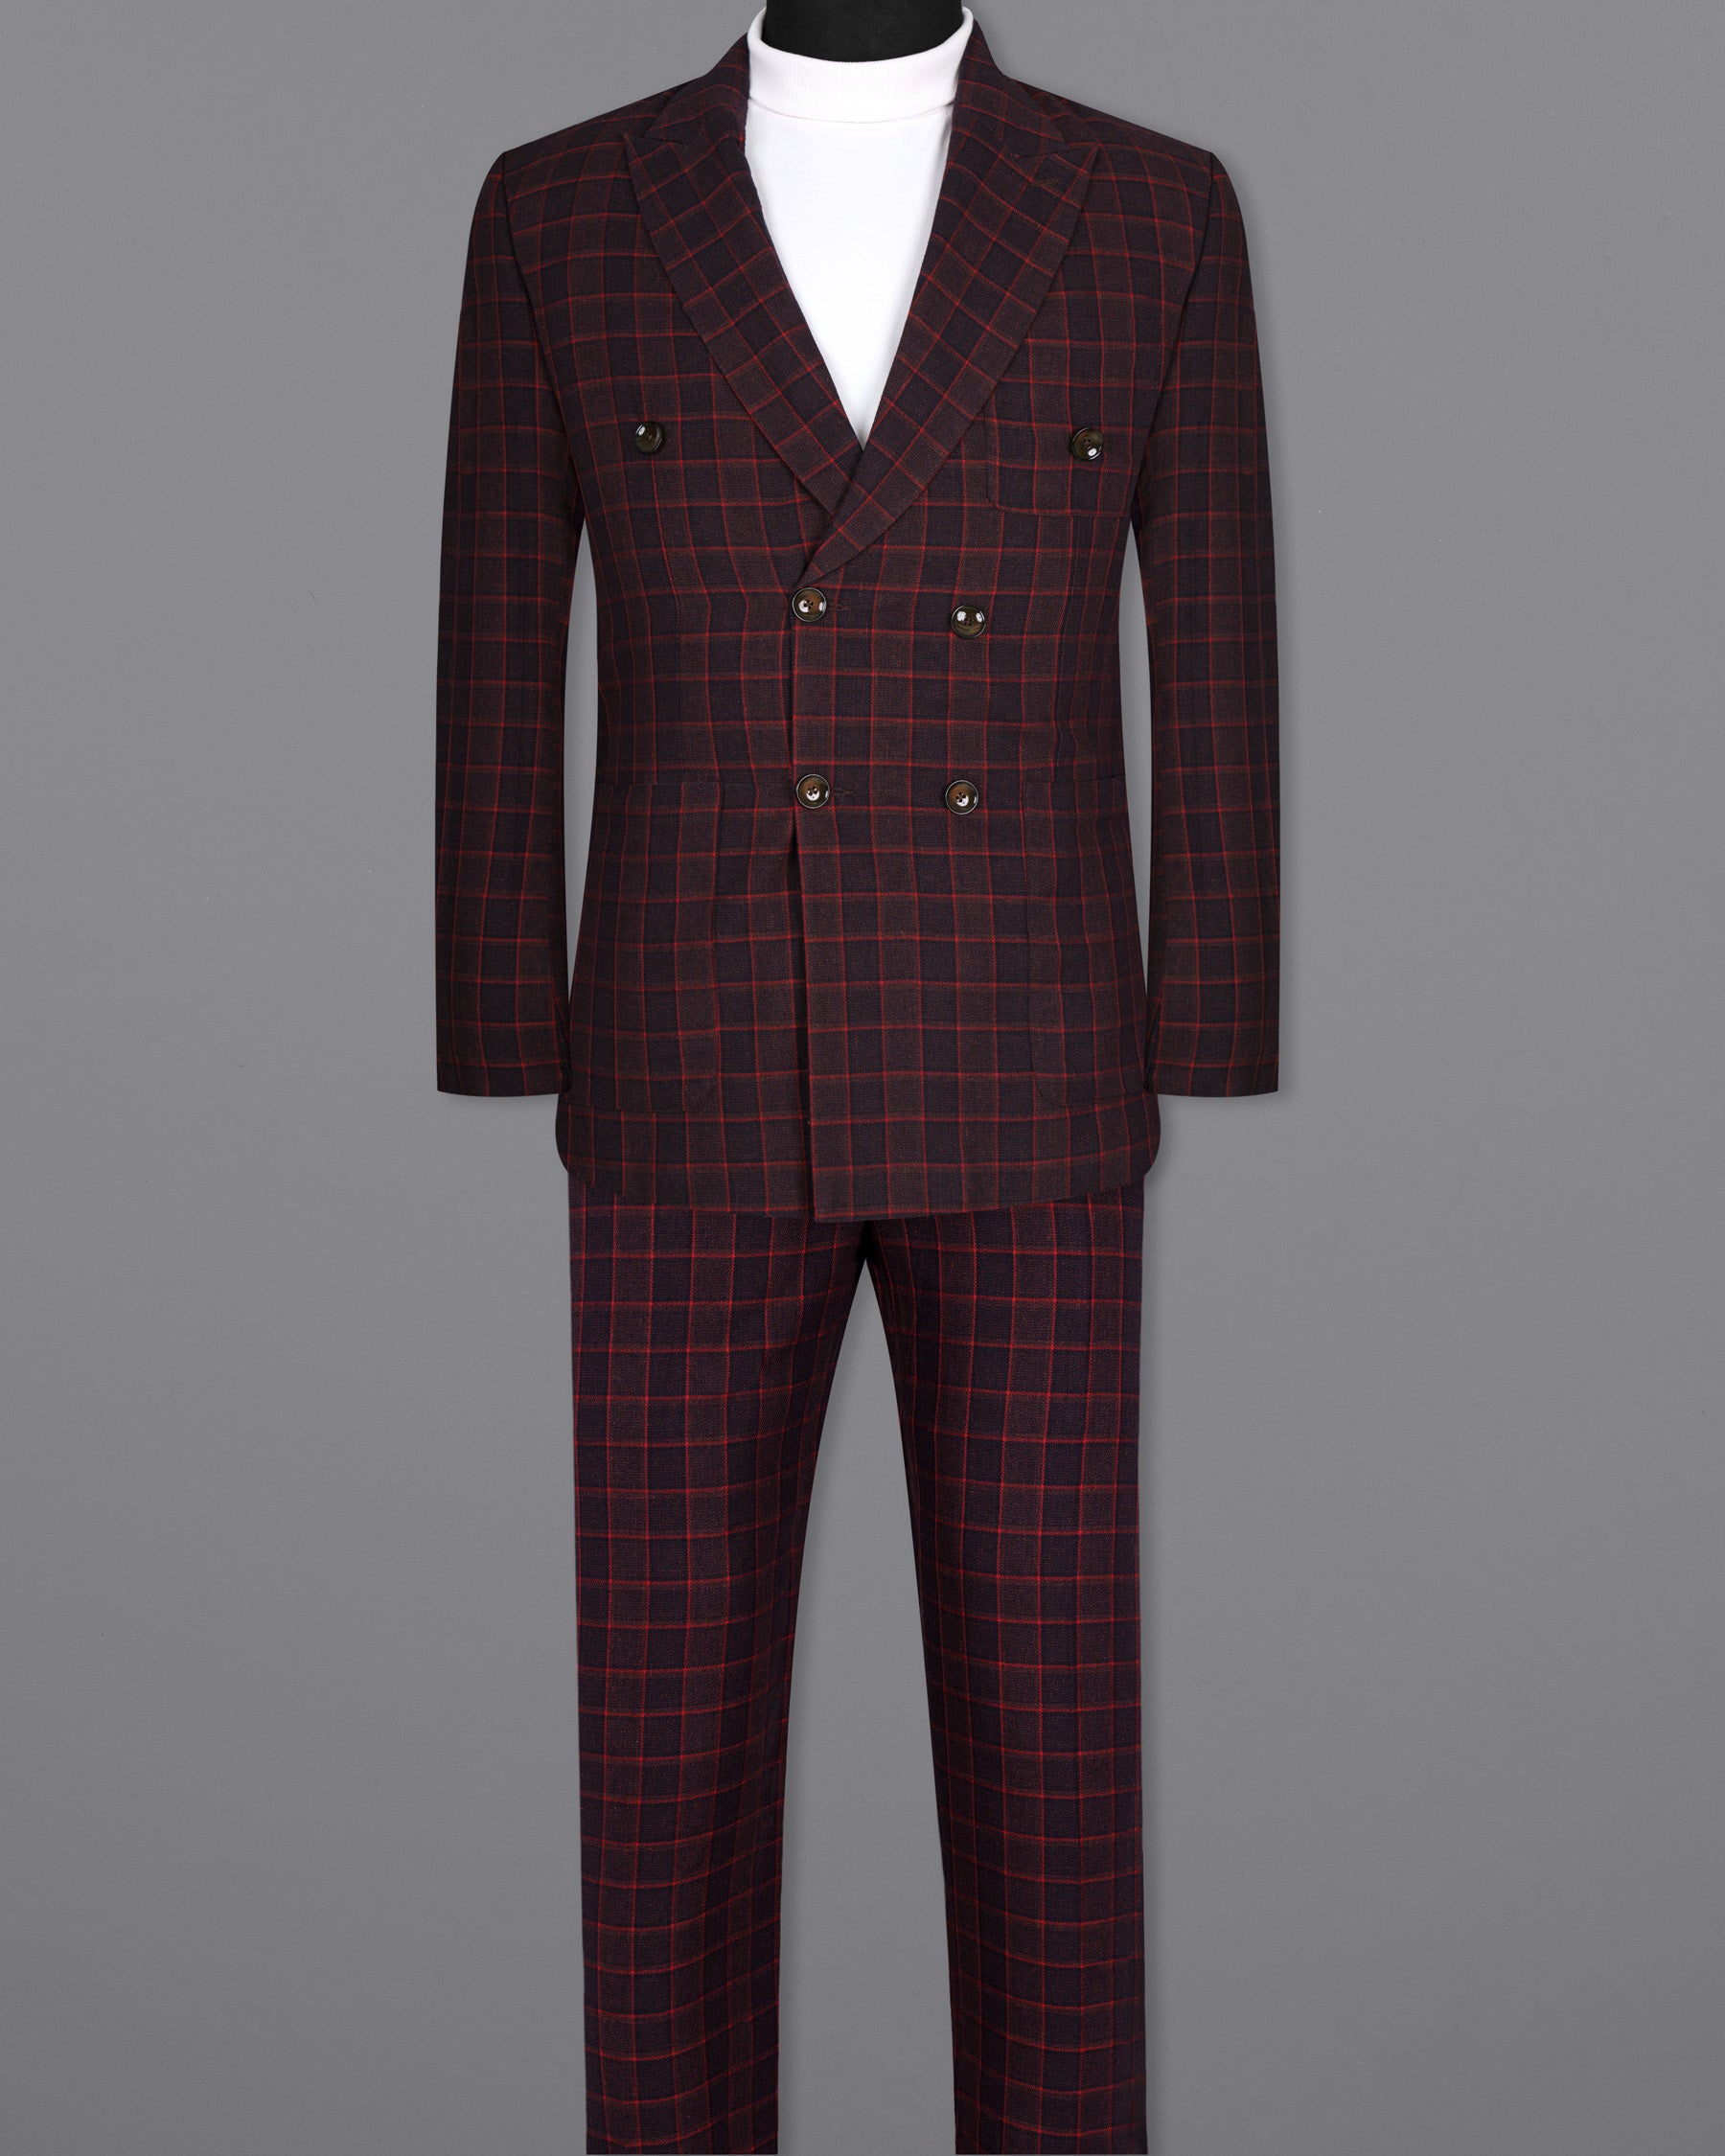 Castro and Well-Read windowpane Double Breasted Premium Cotton Suit